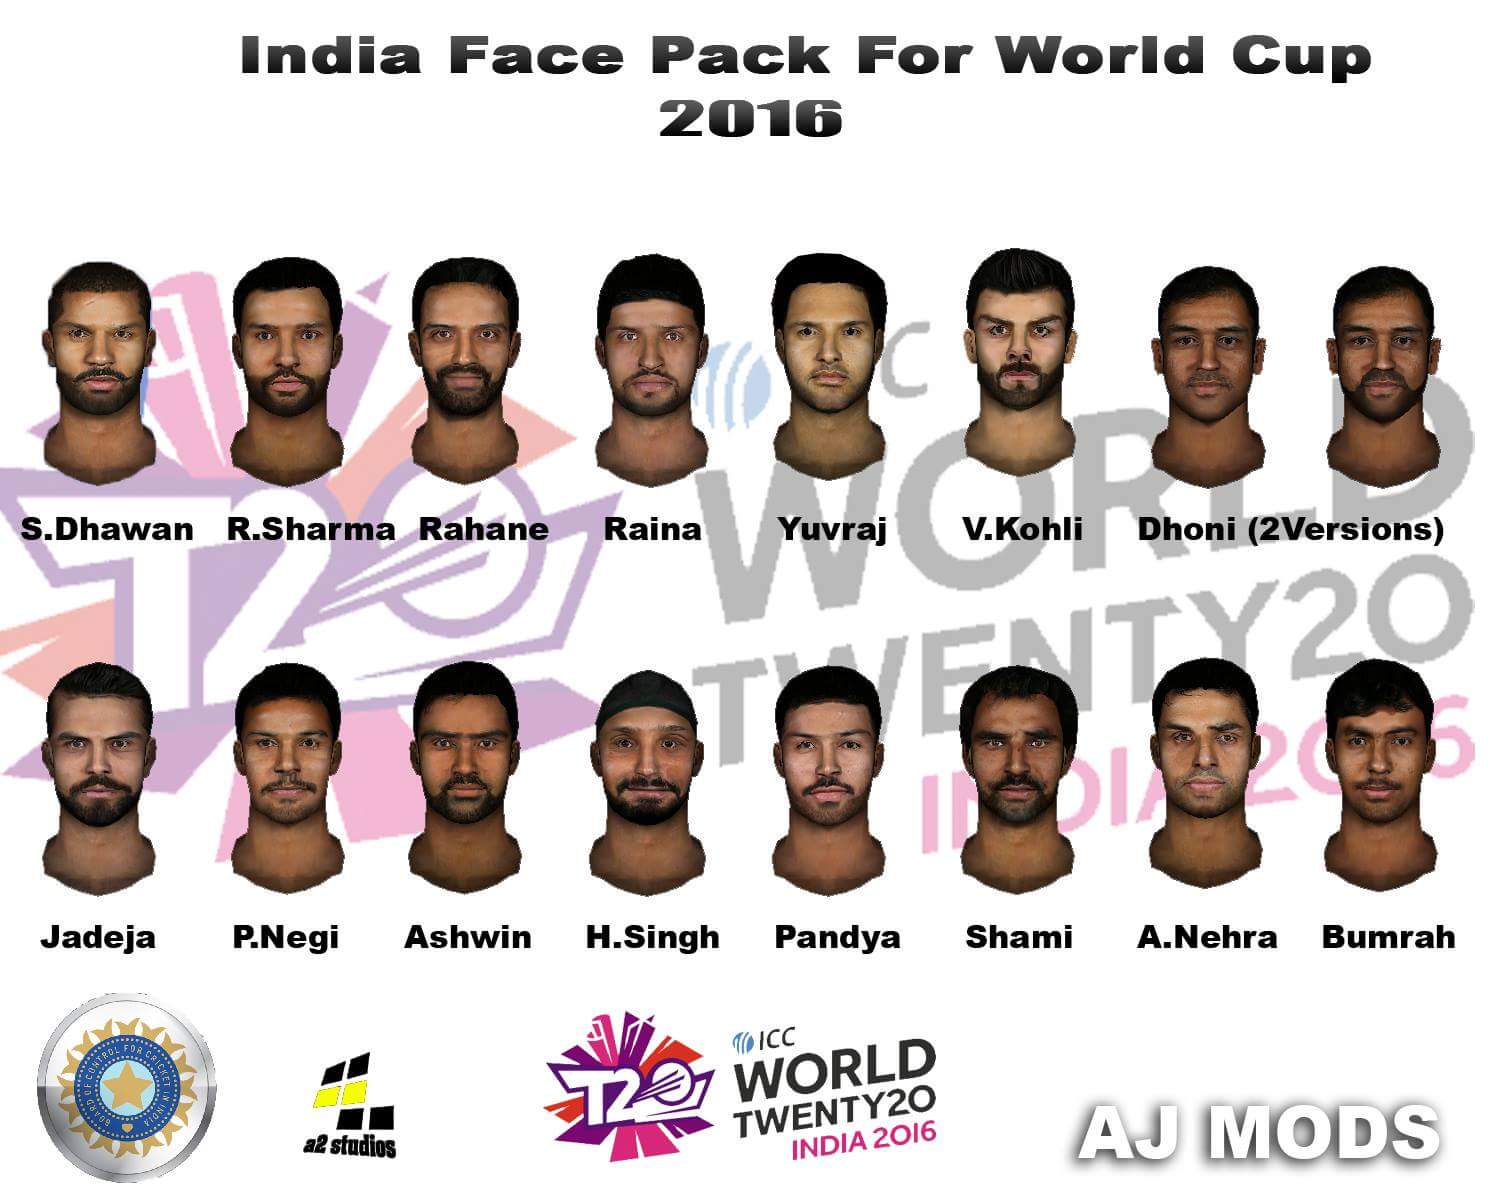 Ipl 2014 face pack patch download